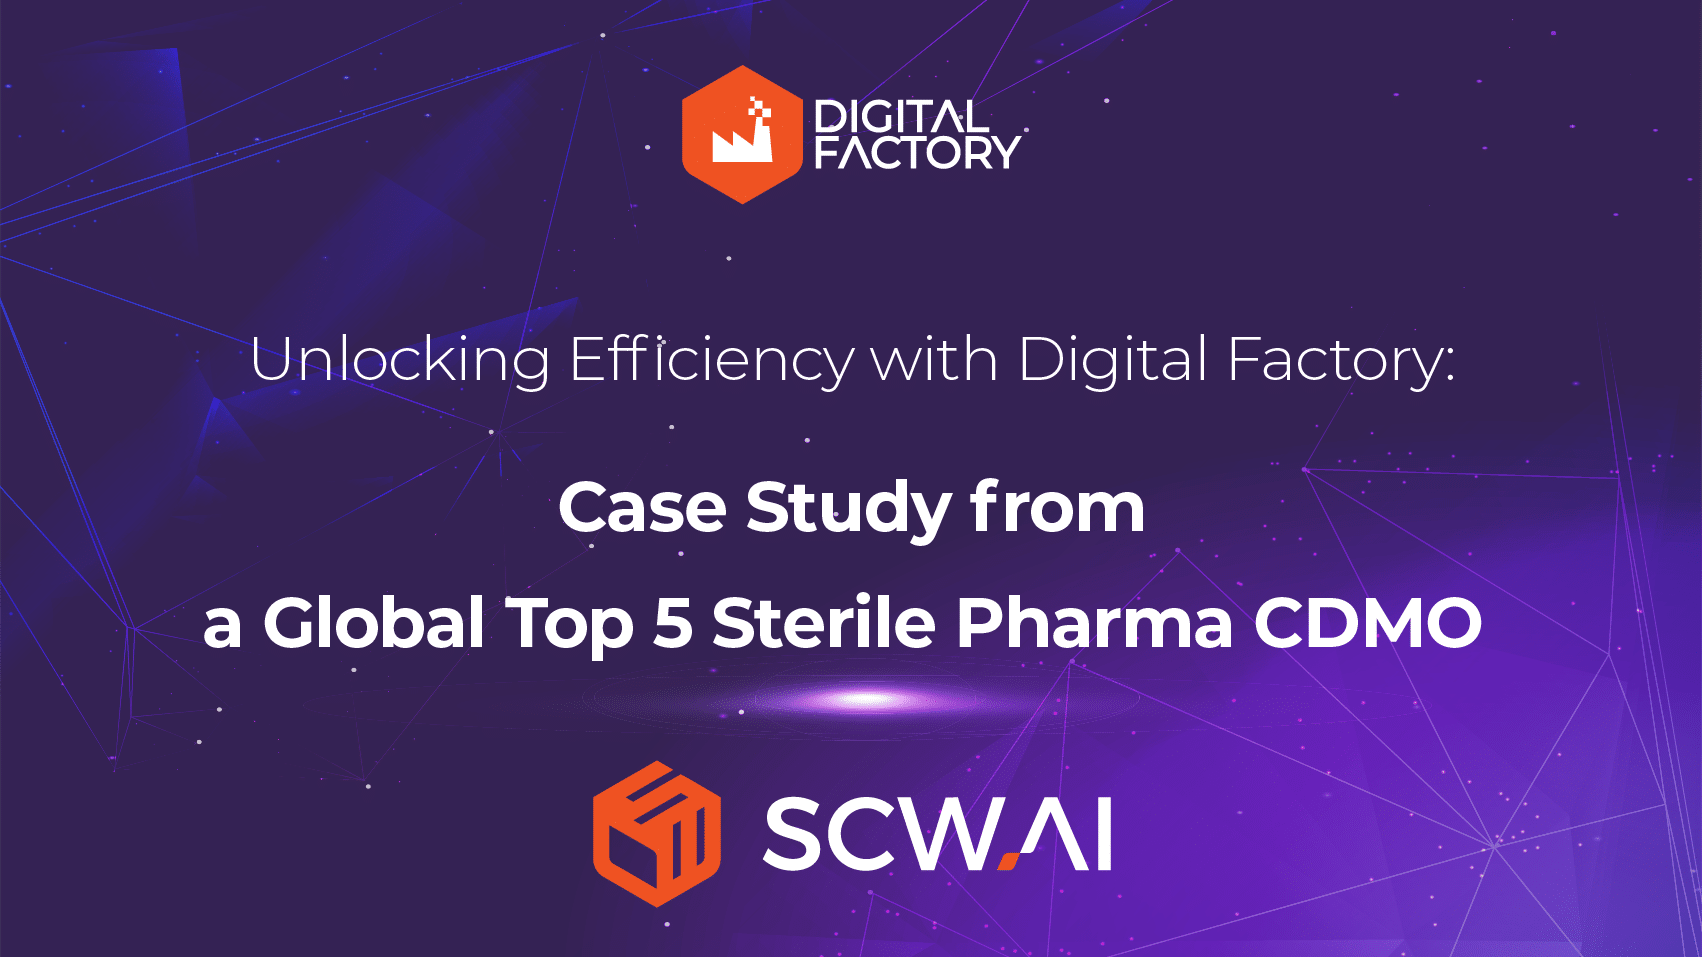 Image is the banner of pharma CDMO case study post of SCW.AI.